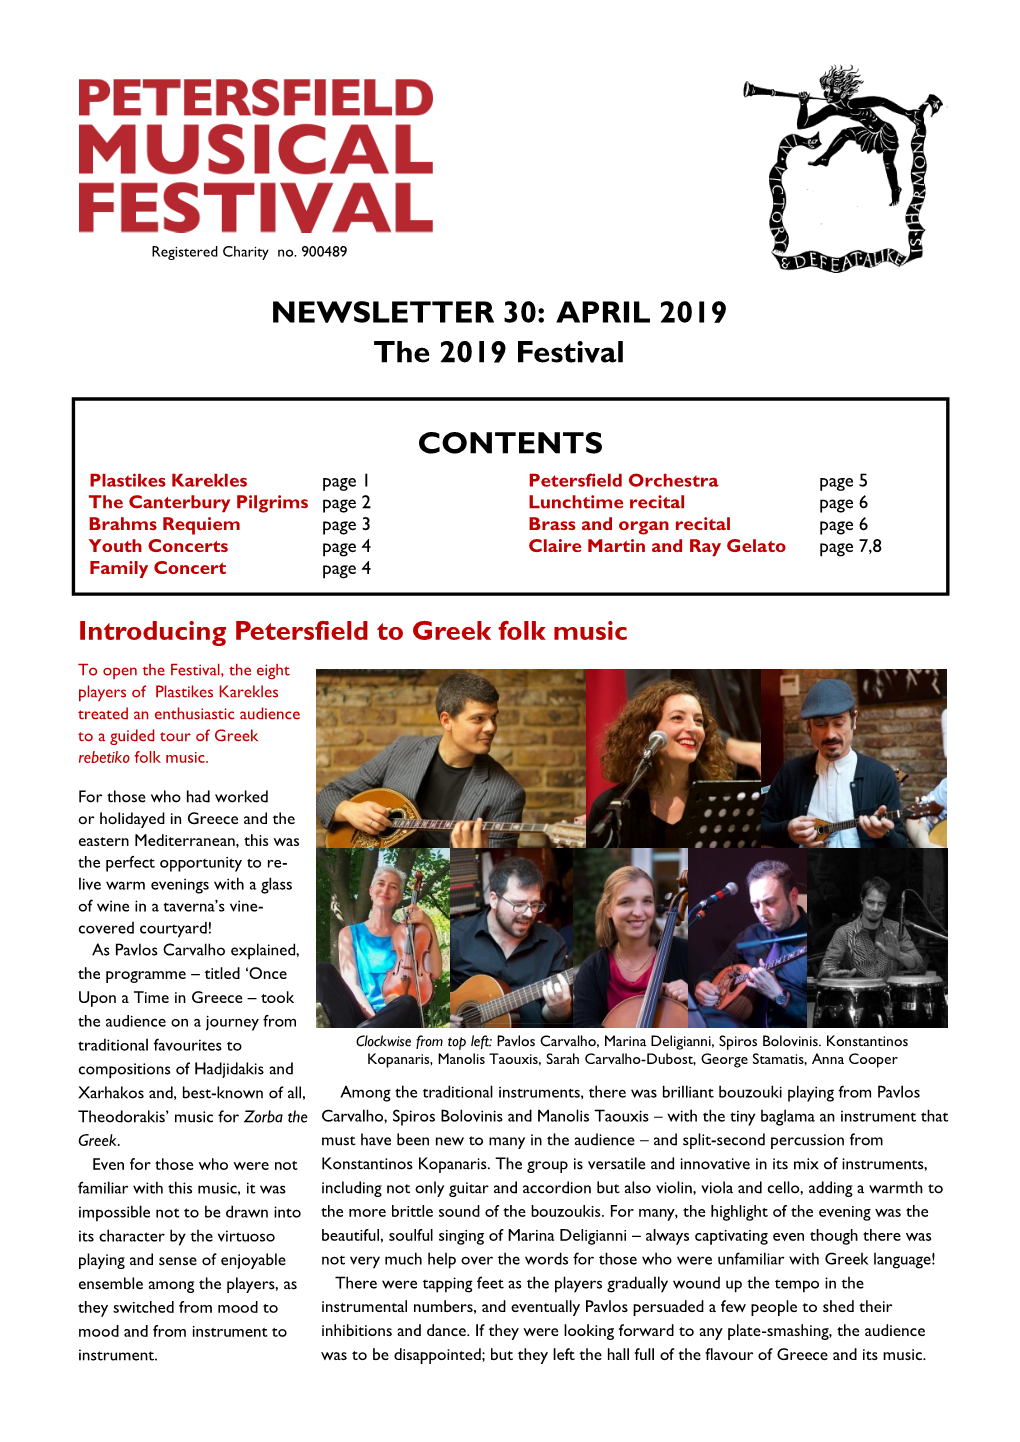 Review of the Petersfield Musical Festival 2019